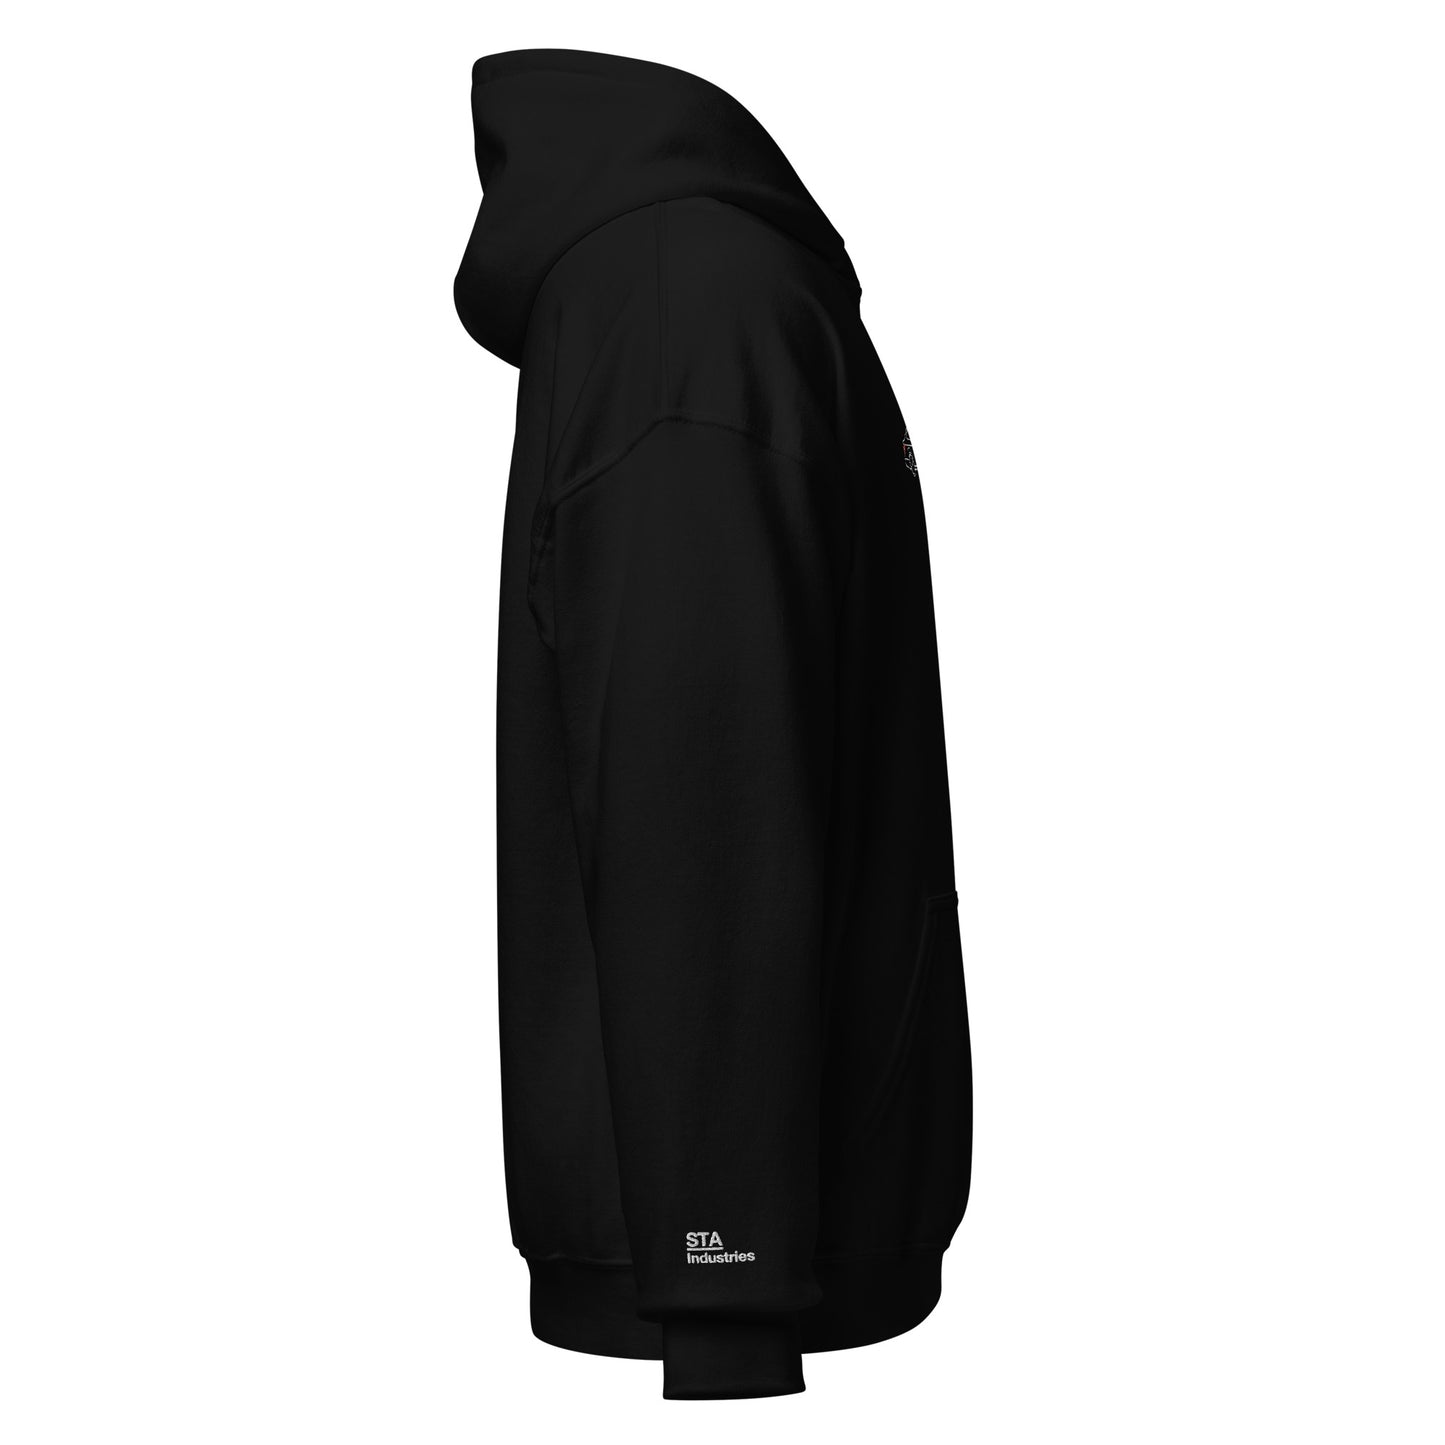 W204 C63 Silhouette Embroidered Hoodie